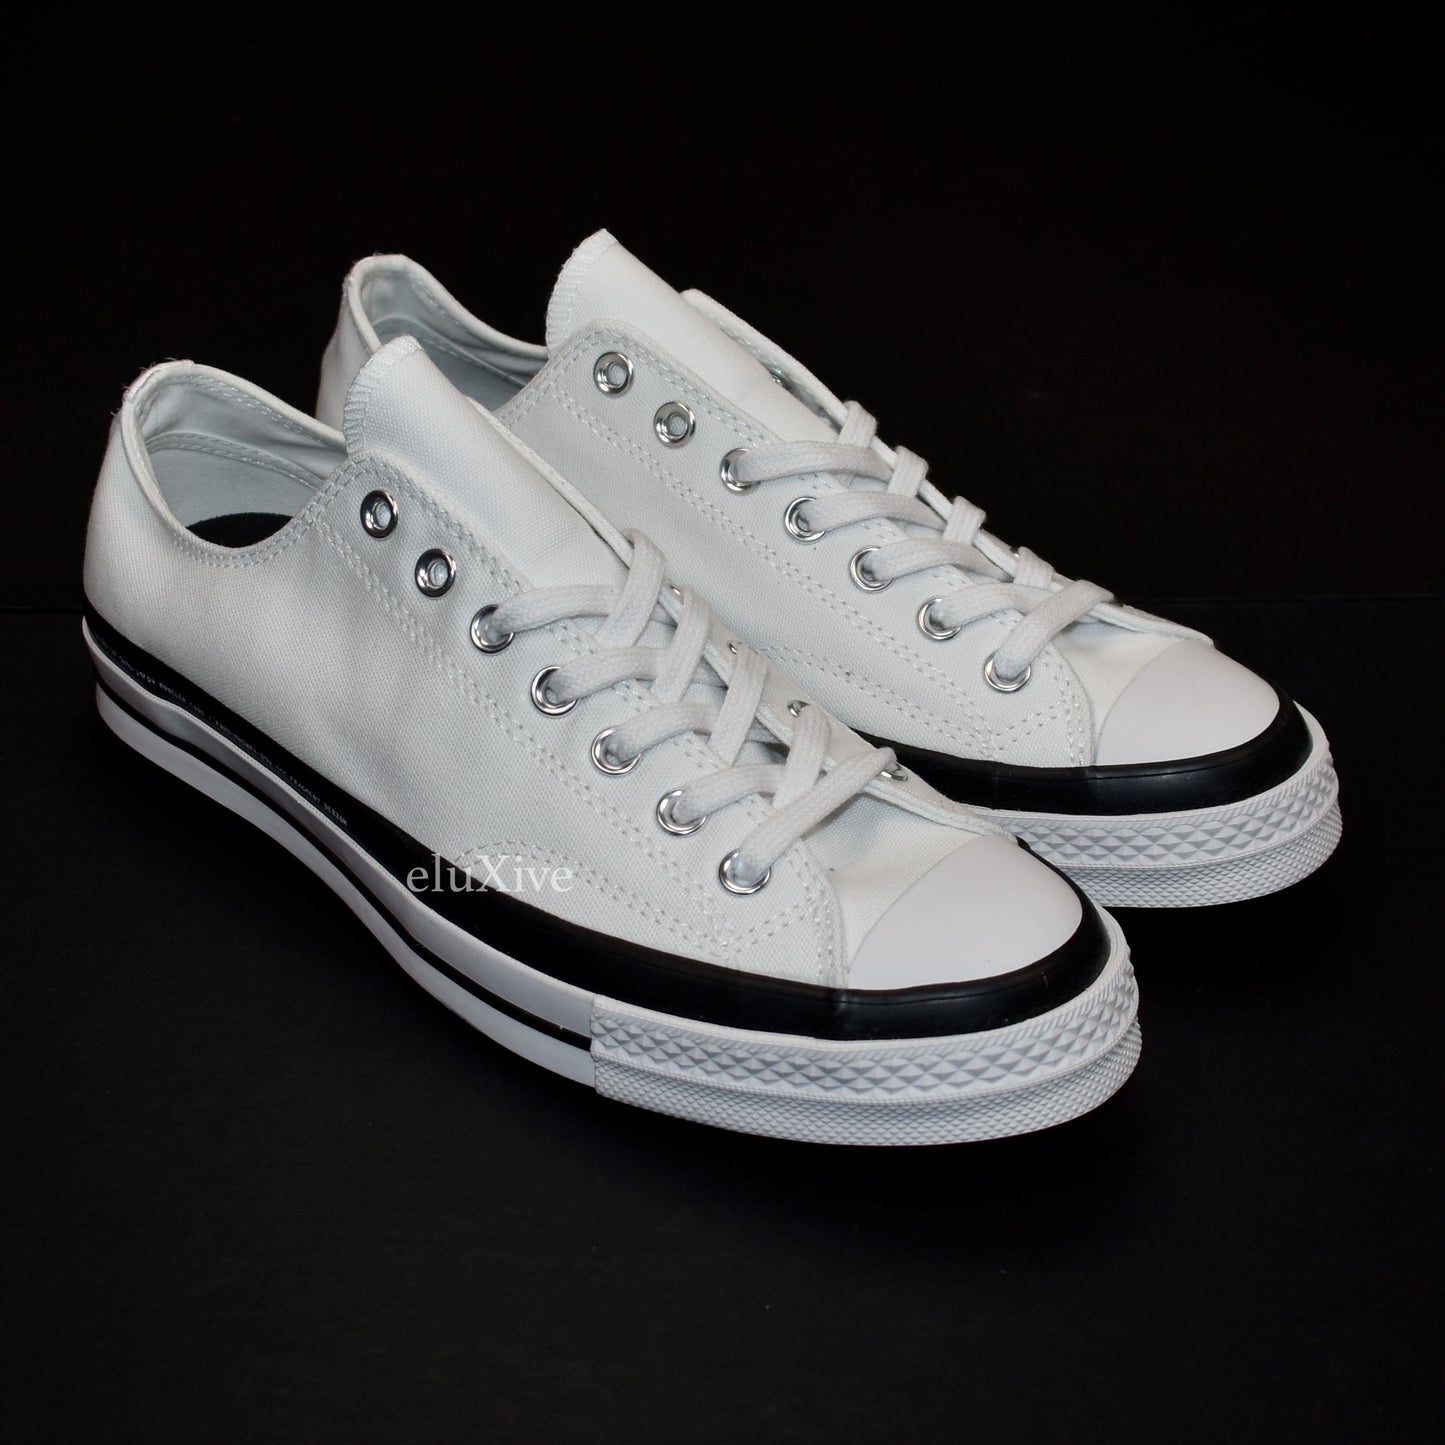 Moncler x Converse x Fragment - Low Top Fraylor Sneakers